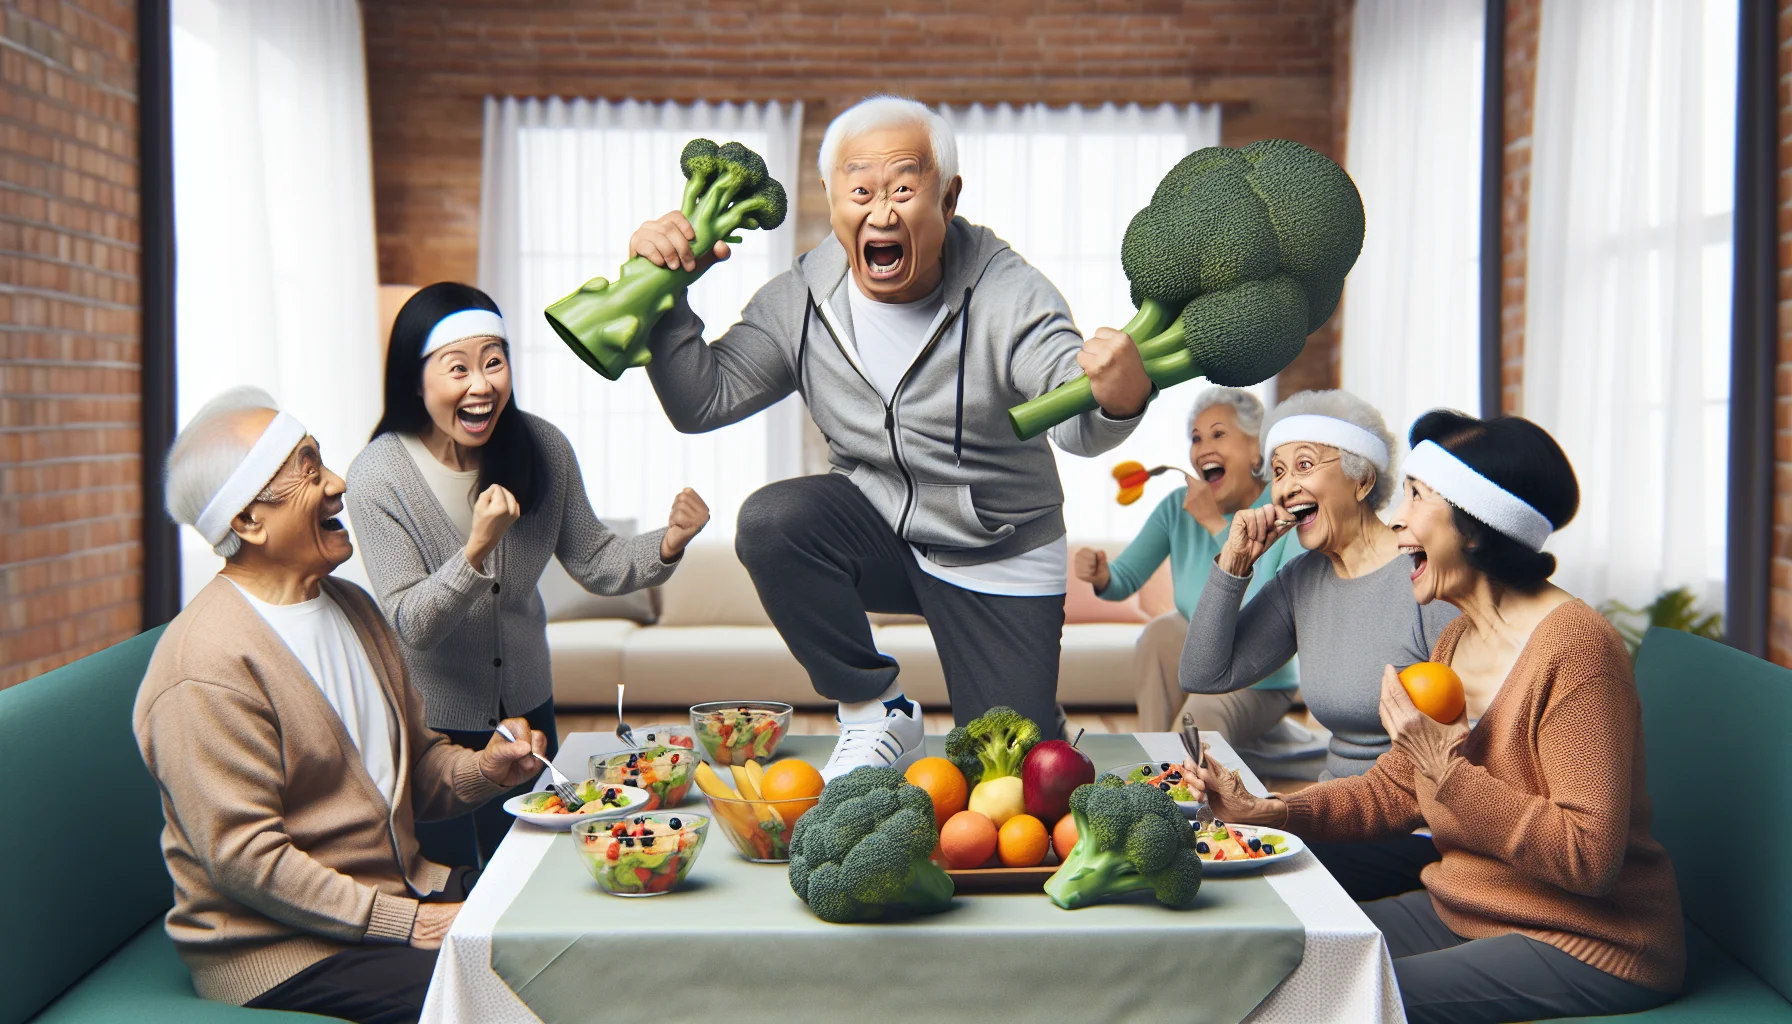 Generate a playful and realistic image portraying a senior nutrition program in an amusing context. Picture an elderly Asian man humorously struggling to lift a giant broccoli dumbbell, symbolising his commitment to healthy eating and exercise. In the background, a group of senior Caucasian and Black women are sitting around a table, laughing and sharing colorful fruit salad while sporting sweatbands, suggesting they've just finished a fun workout. Also, visualize an elderly Middle-Eastern woman playfully chasing a cartoonish carrot on a stick, signifying the pursuit of a healthy diet.